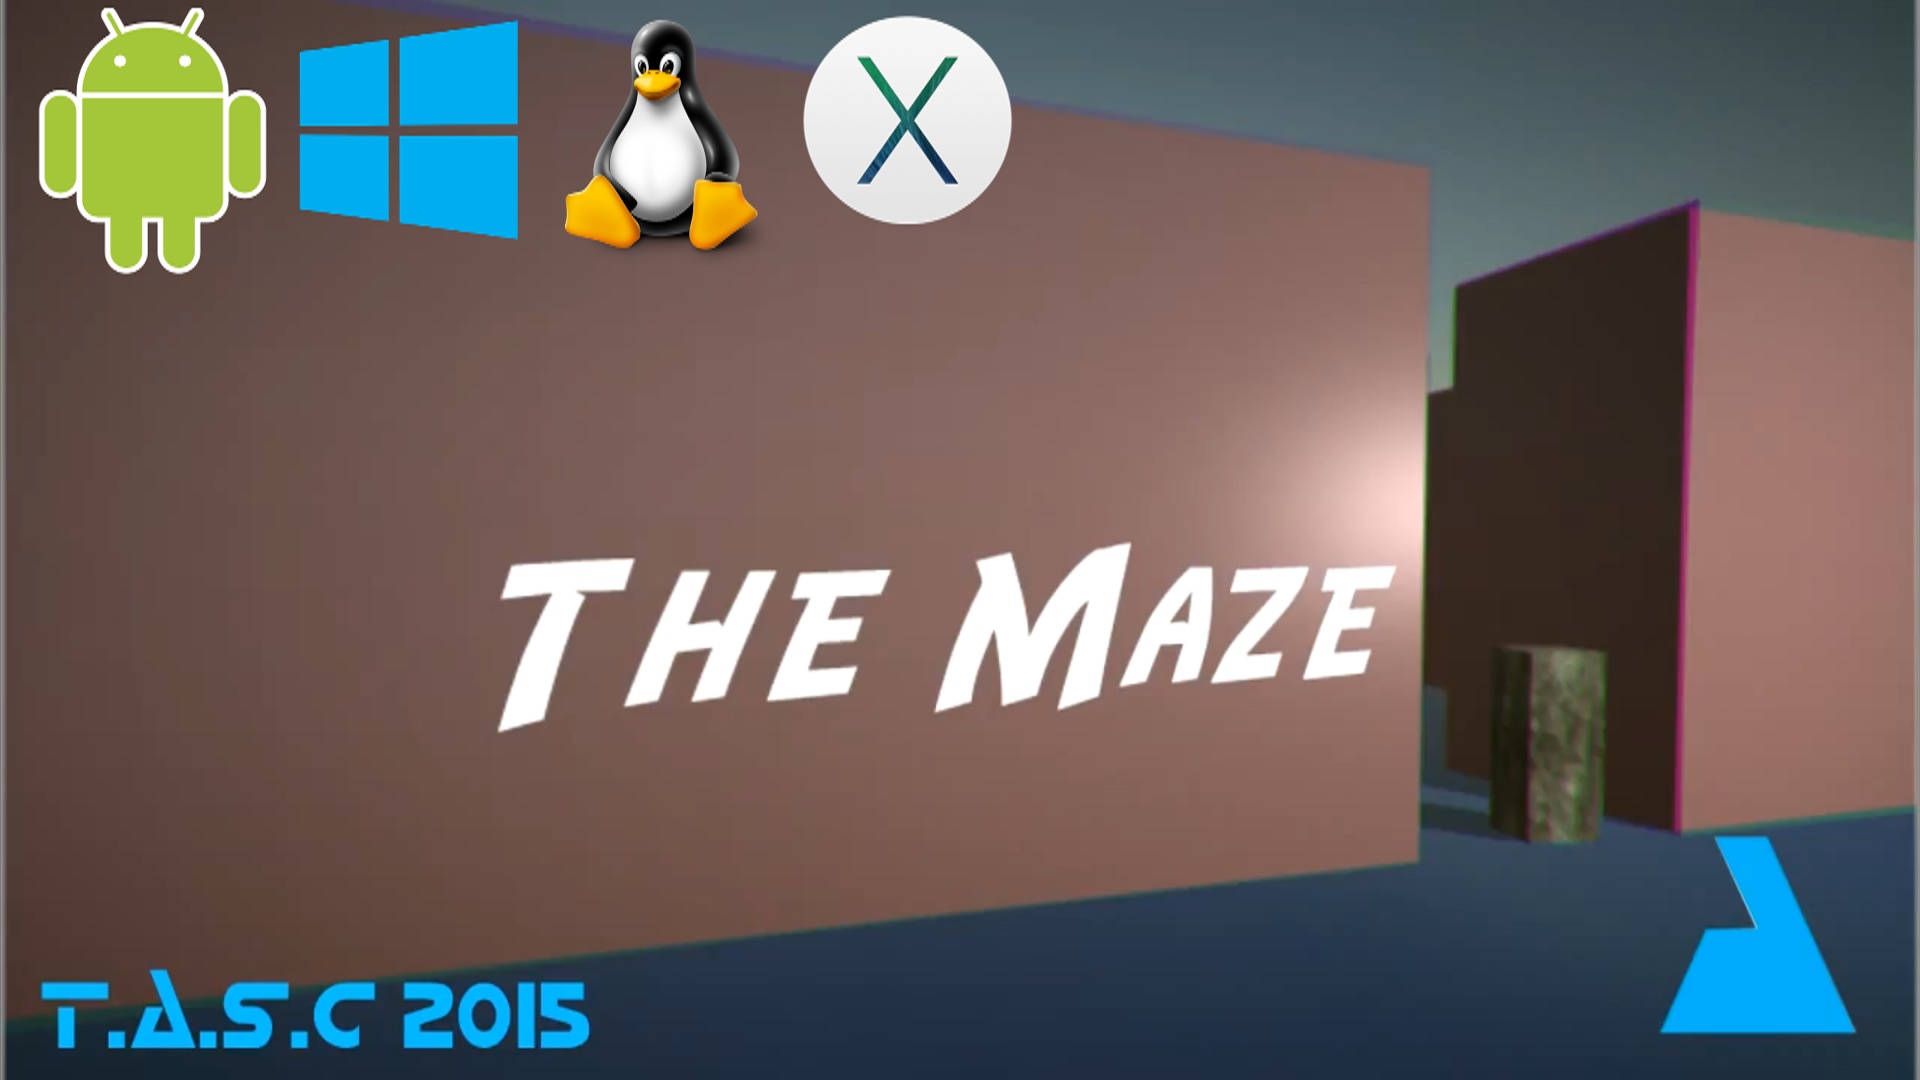 download the new version for mac Mazes: Maze Games